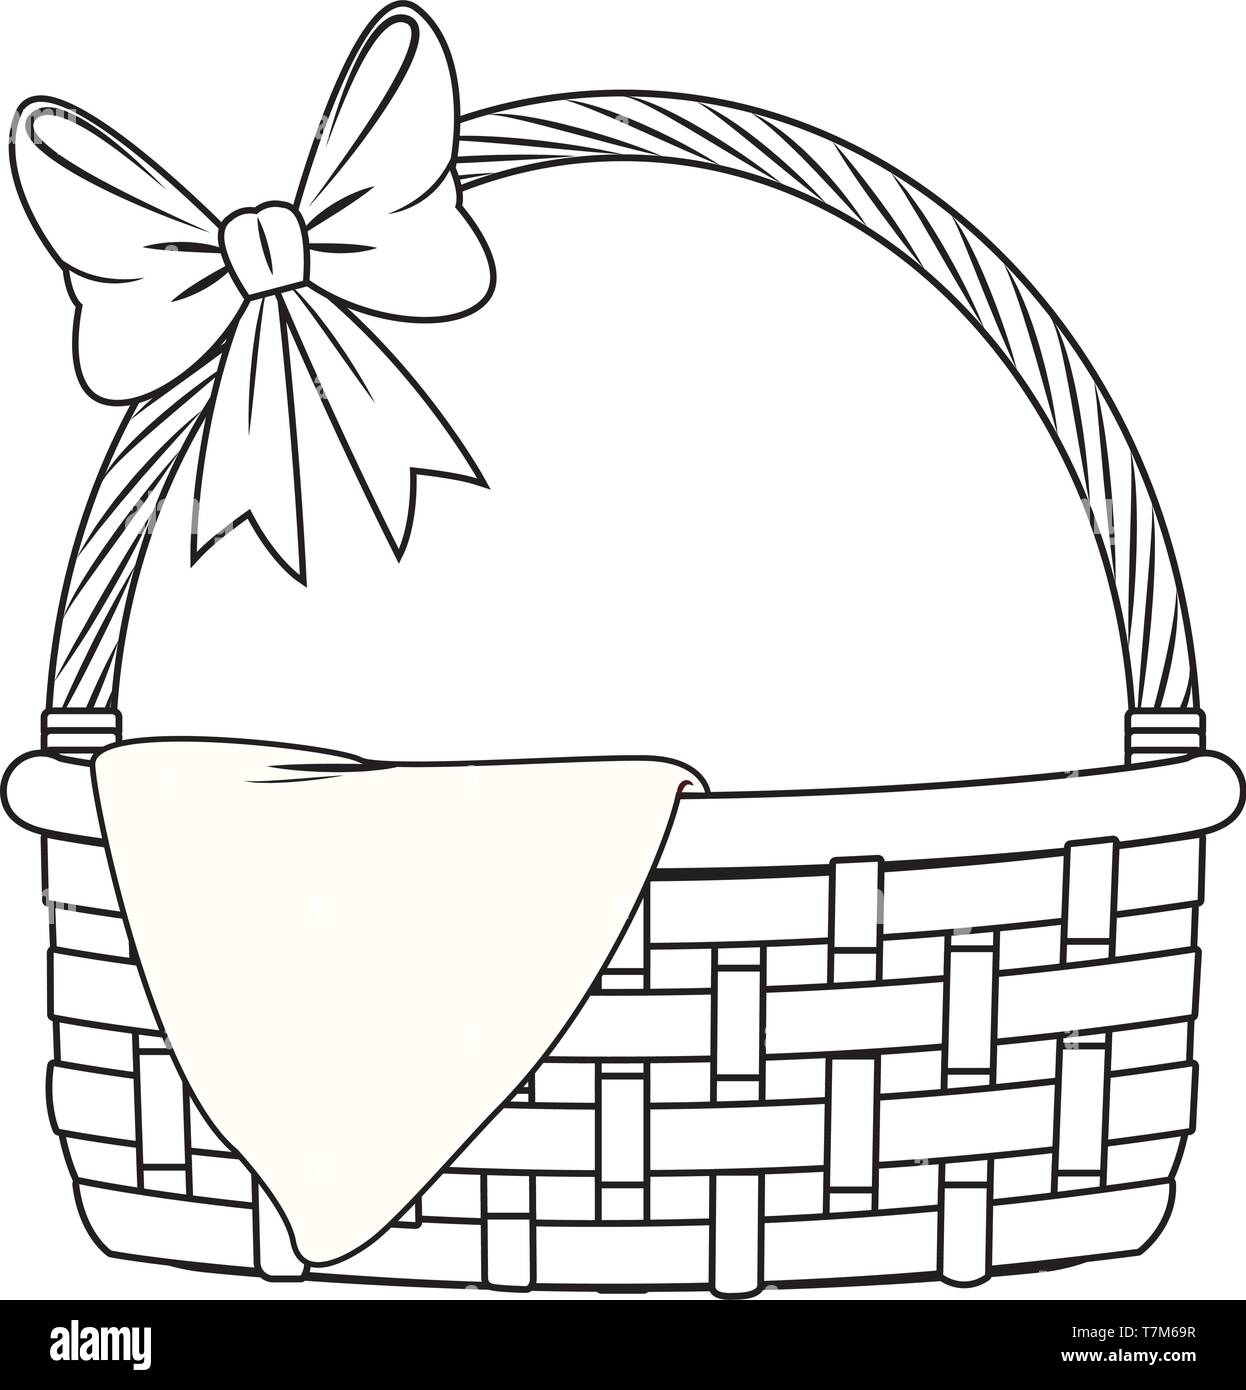 Wicker basket with ribbon and cloth isolated black and white Stock ...